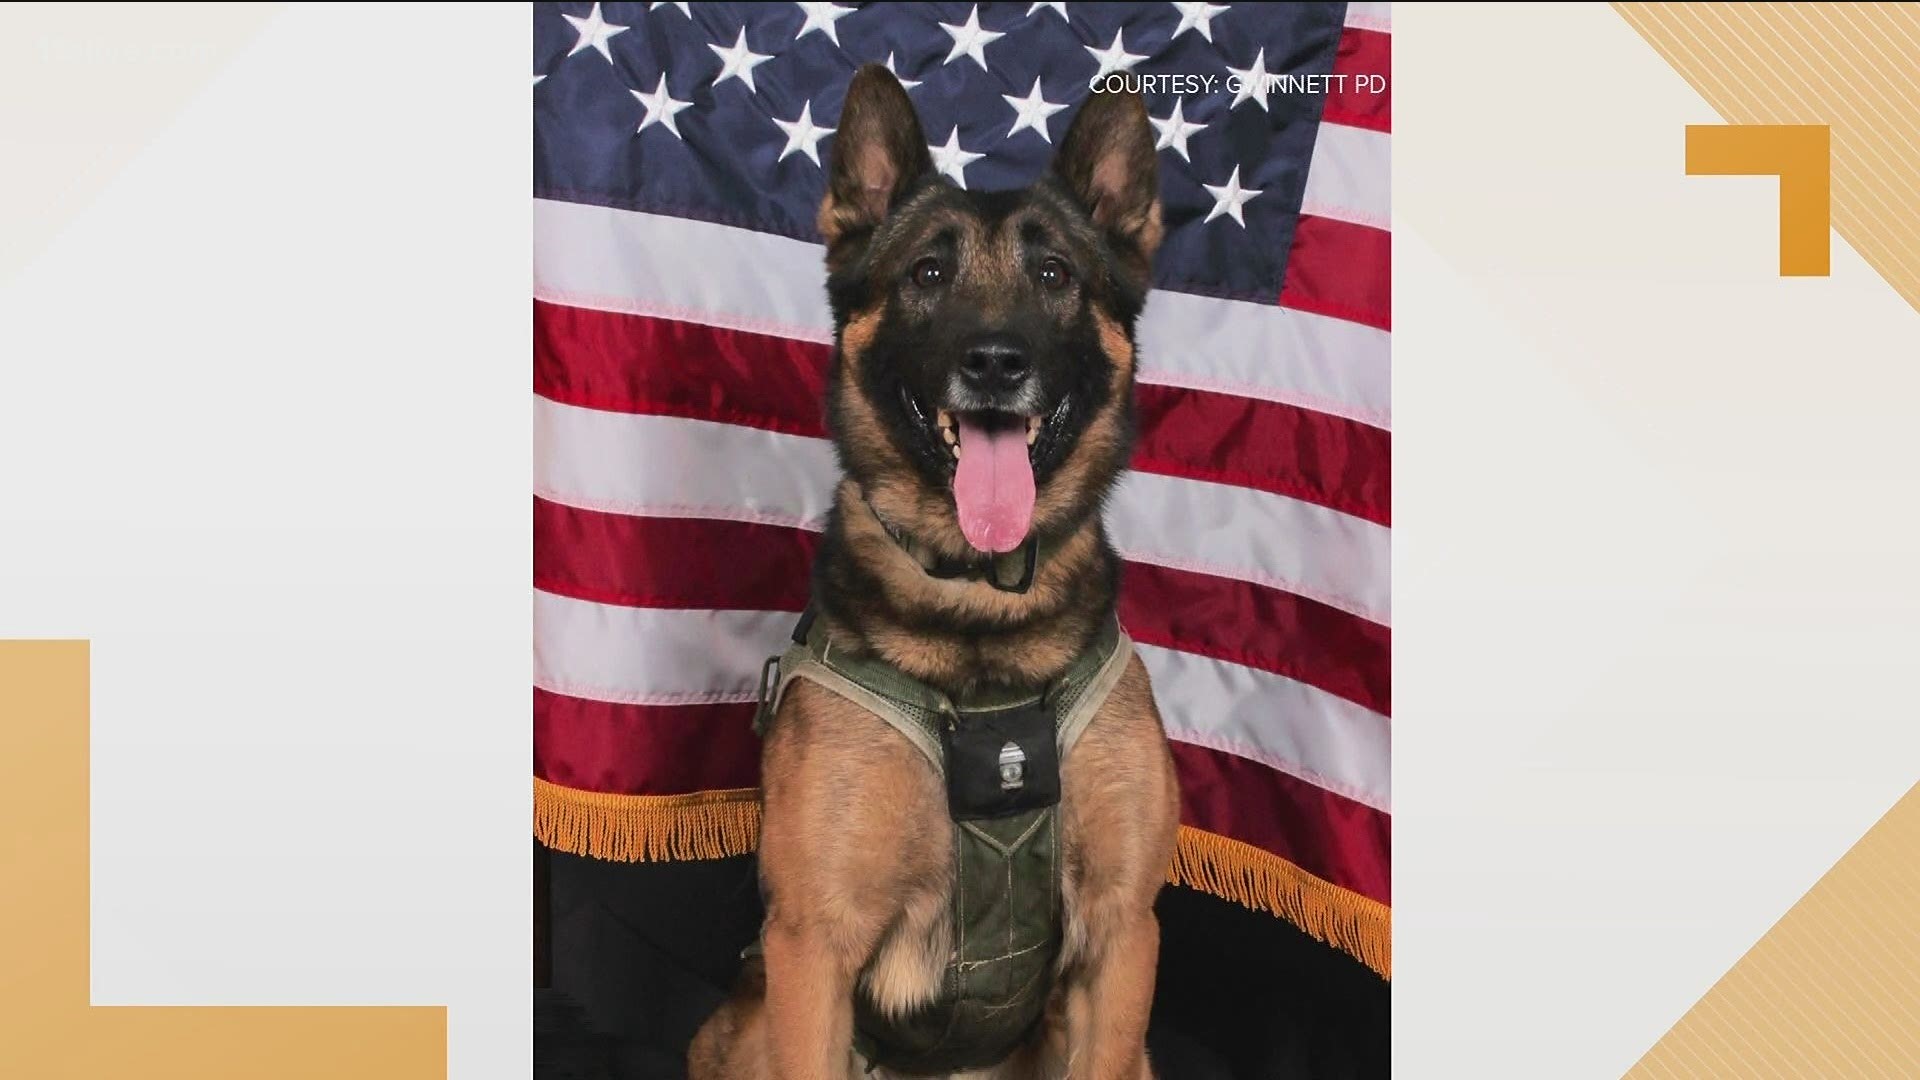 Blue was killed in the line of duty on Sept. 10 while tracking a suspect who fled from a stolen vehicle.